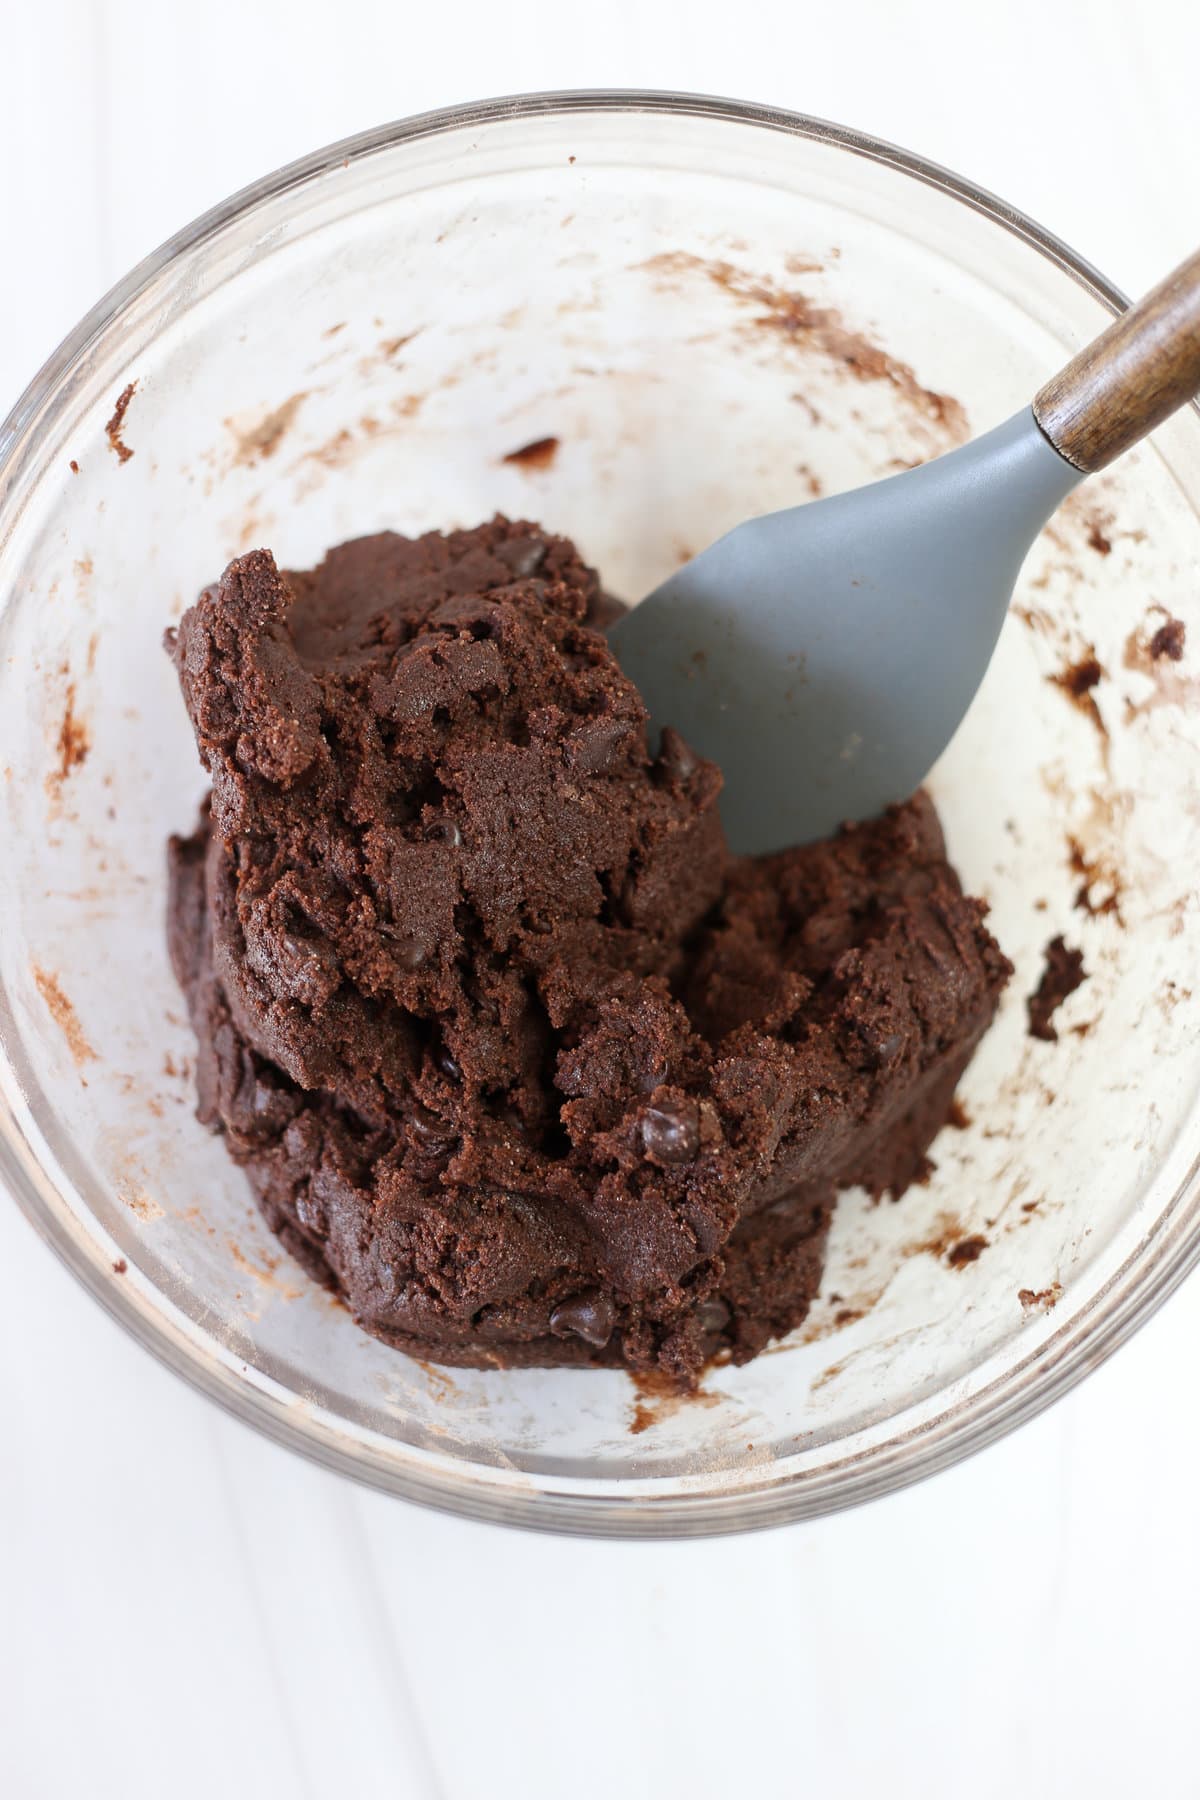 Brownie cookie dough being mixed with a wooden spoon in a glass bowl.